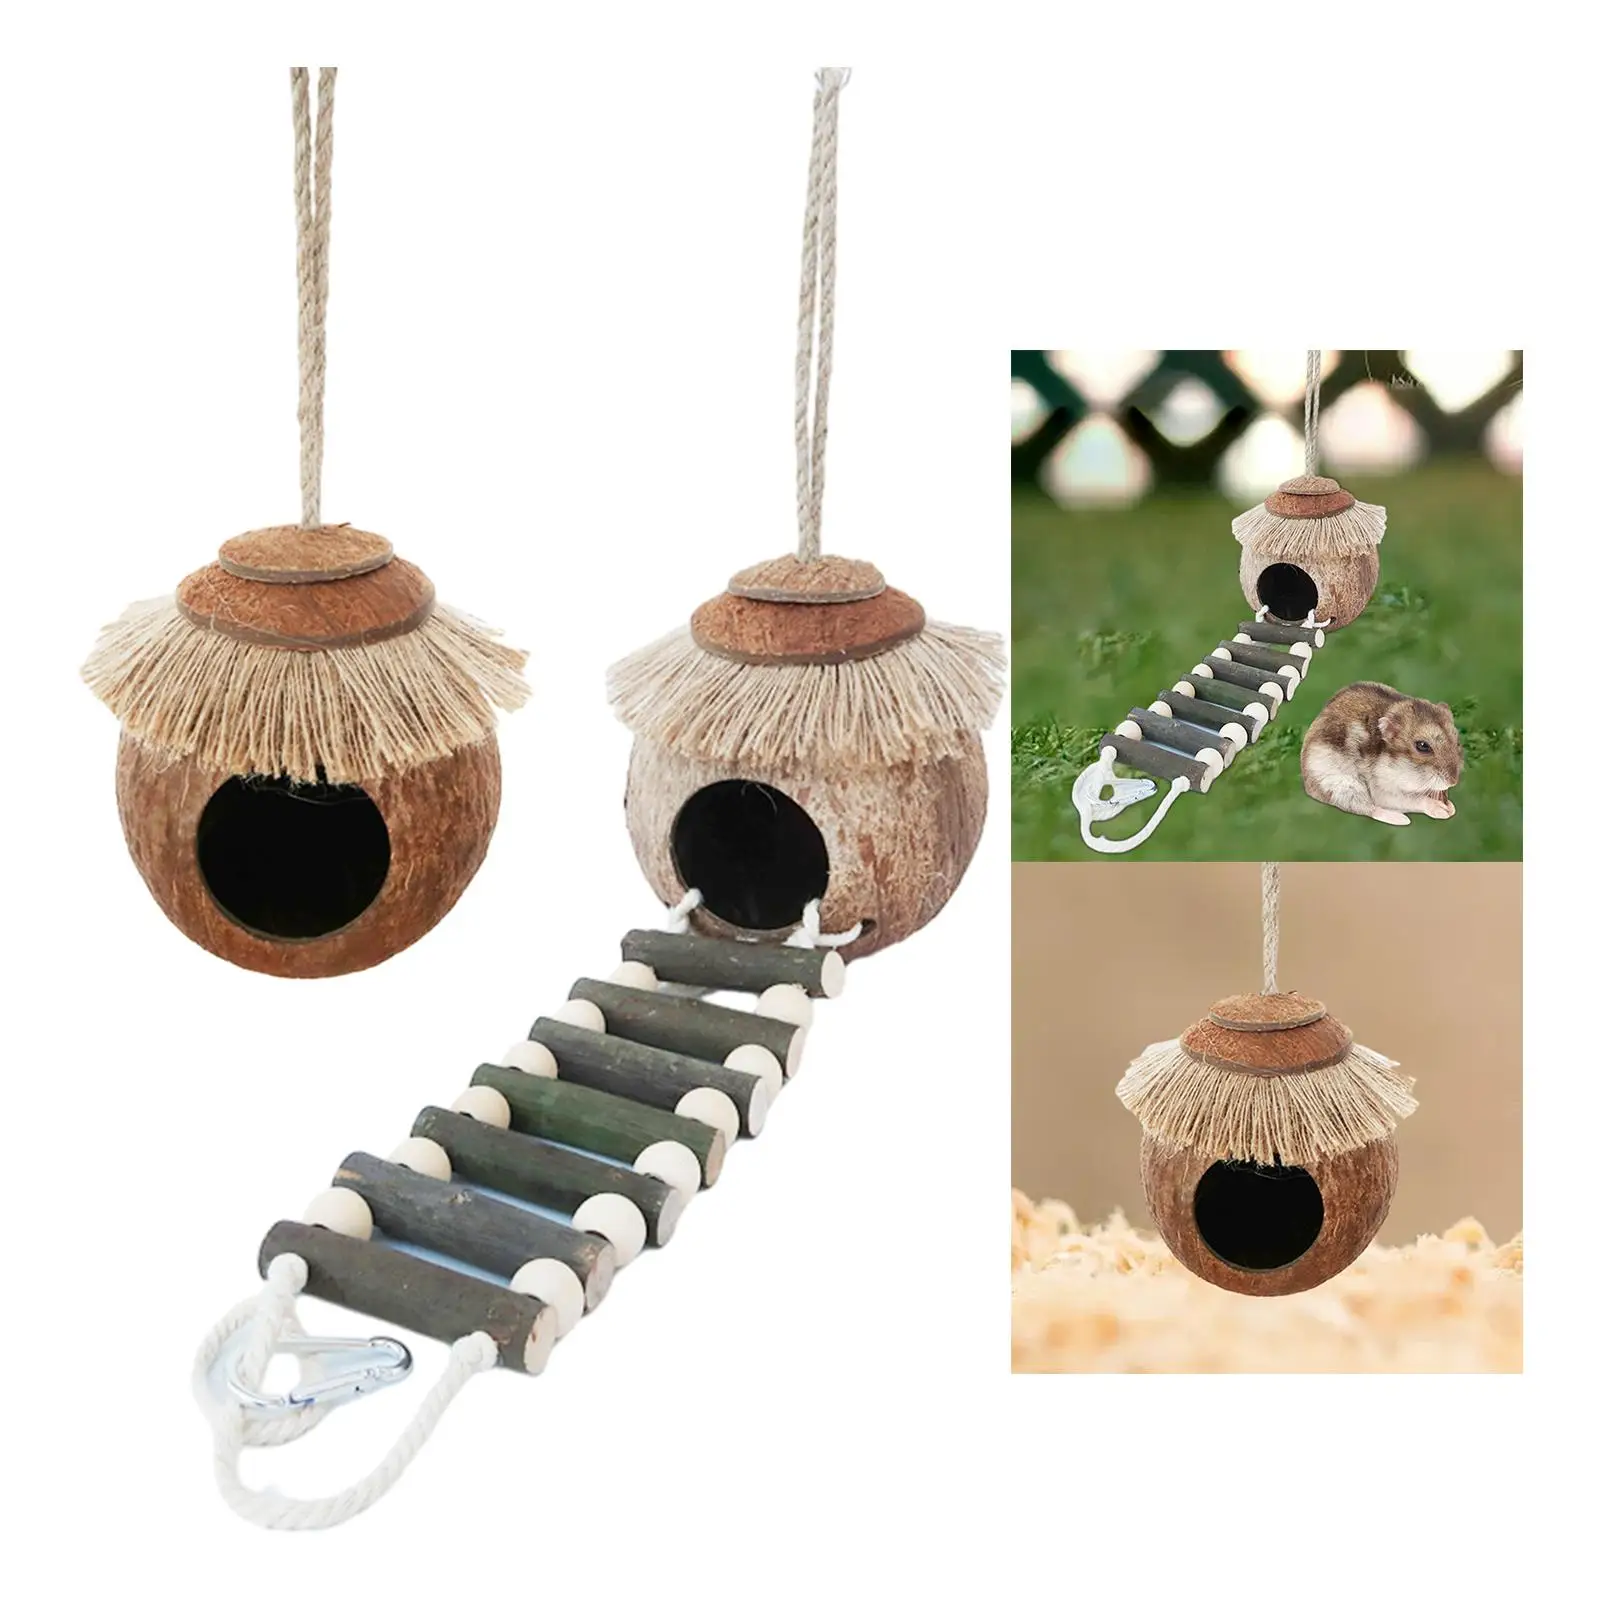 Coconut Shell Parrot Nest Hideaway Cage Hanging Toy Habitats Decor Birdhouse Cage for Bird Small Animals Budgie Parrot Hamster